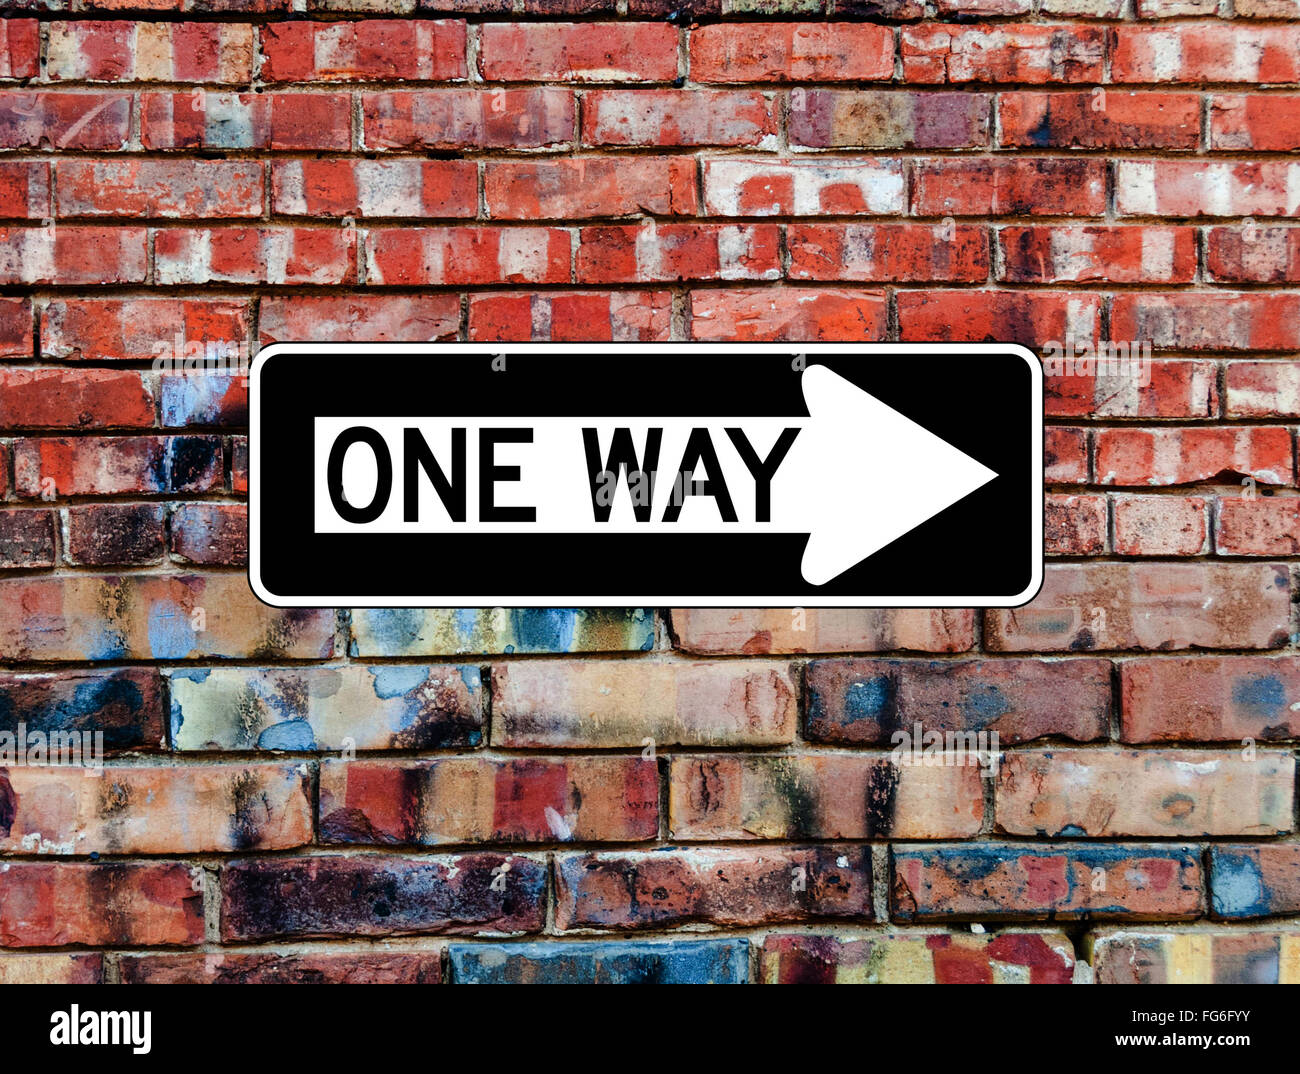 One Way Sign on Brick Wall Stock Photo